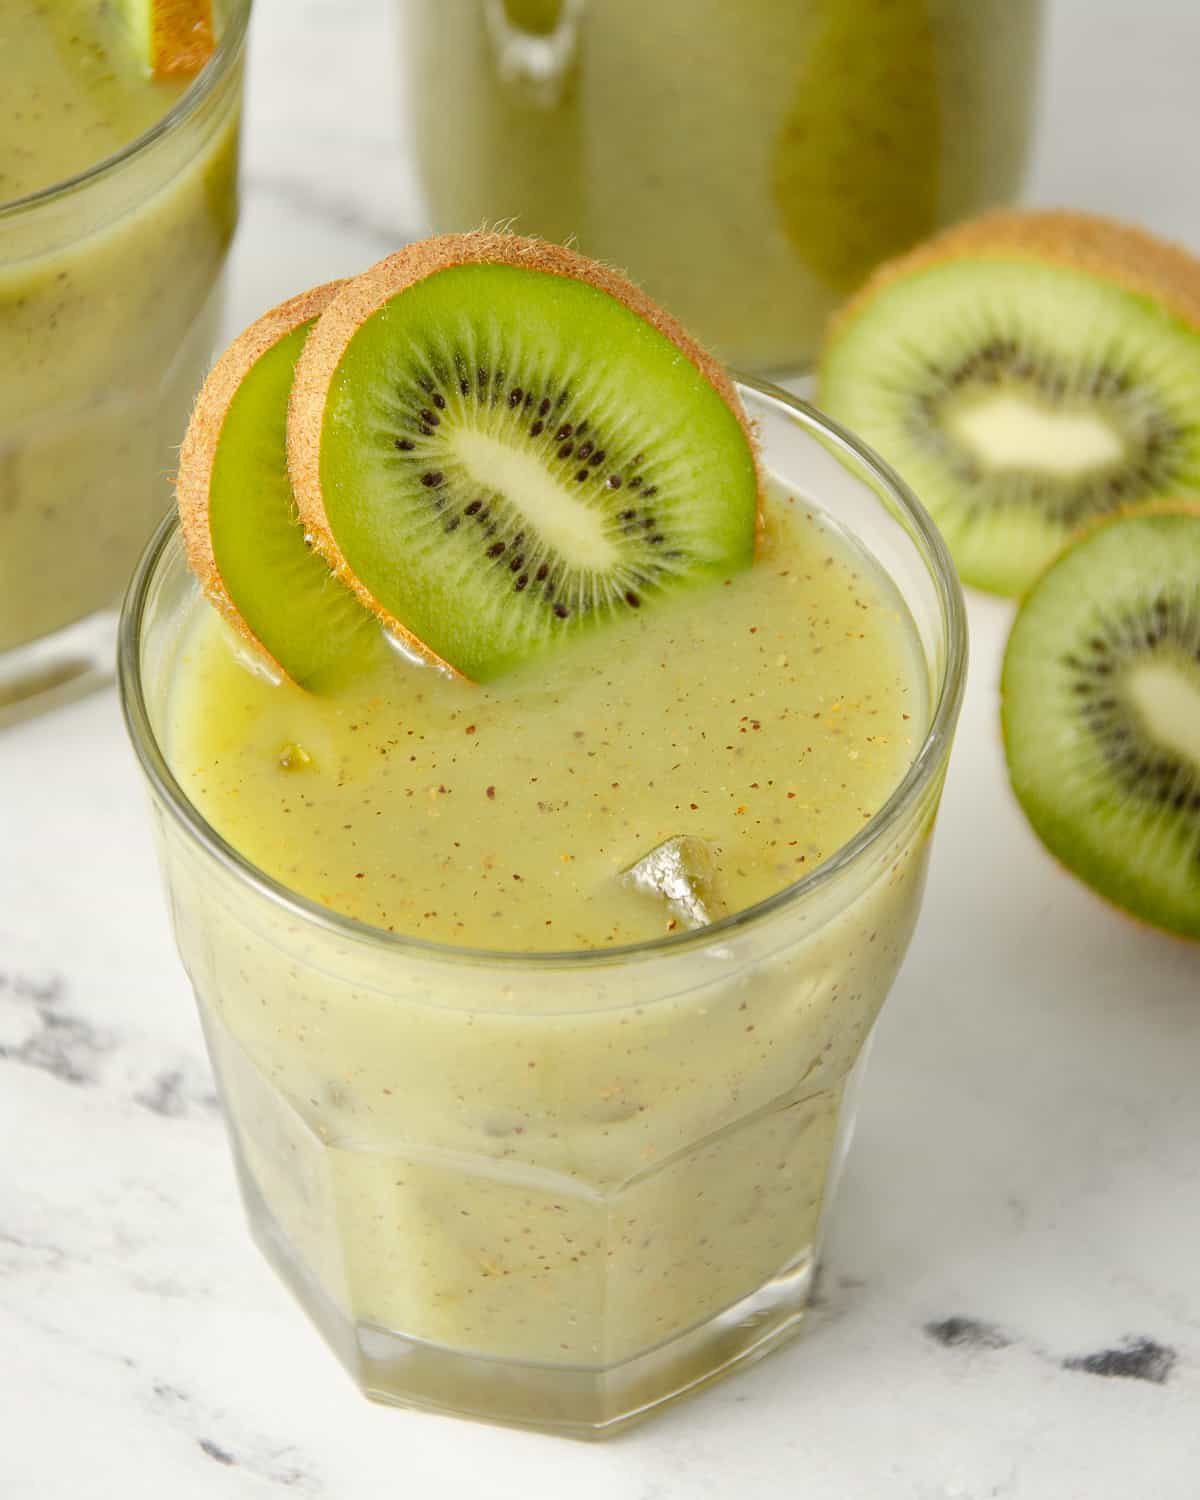 A glass of fresh kiwi juice with kiwi slices, and a pitcher of kiwi juice in the background.